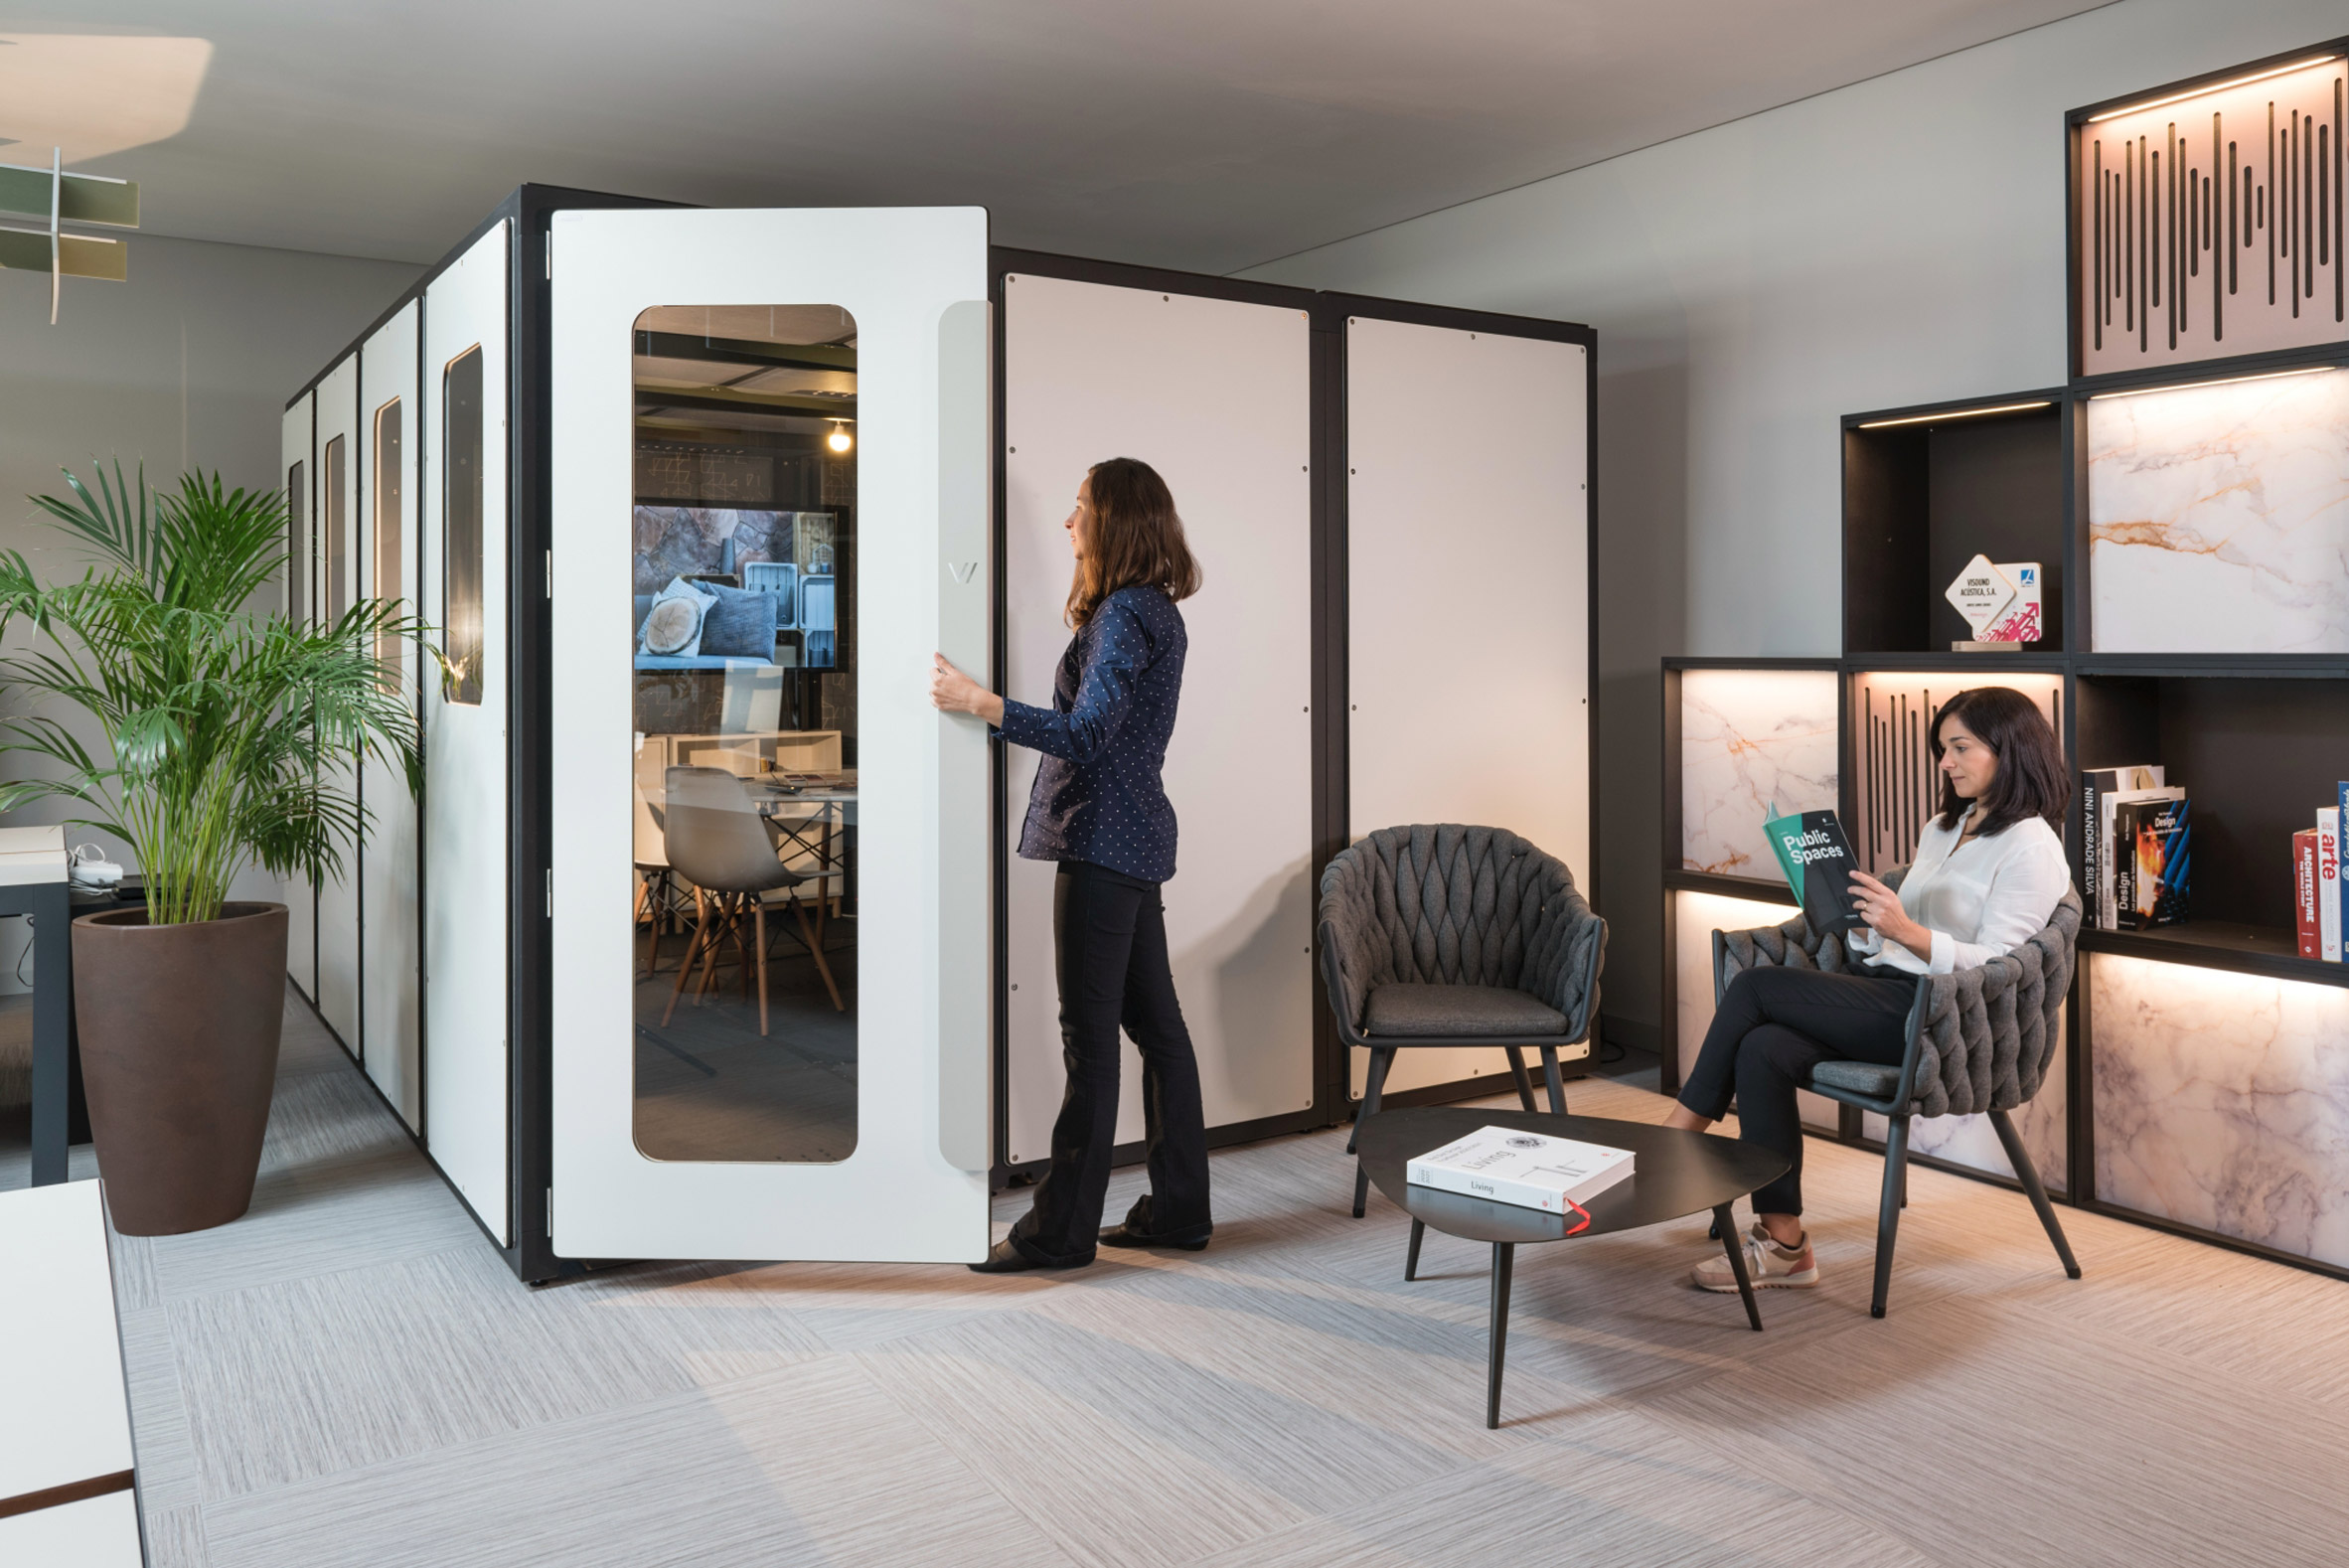 Vicbooth Office pod by Vicoustic used in the corner of an office with white walls and glass door